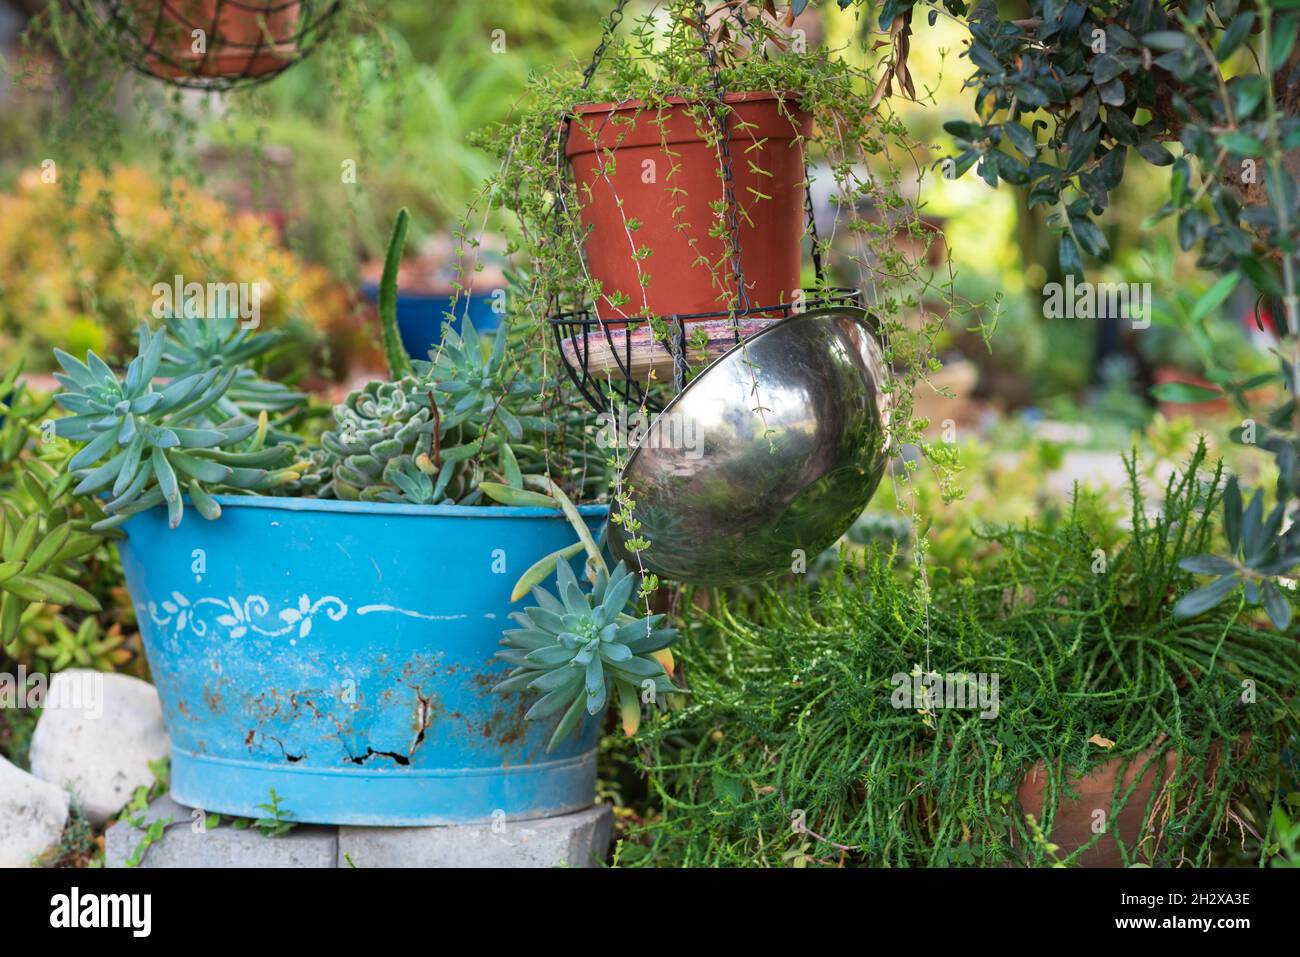 https://c8.alamy.com/comp/2H2XA3E/recycling-garden-ideas-how-to-responsibly-get-rid-of-old-cookware-pots-and-panscookware-turn-into-garden-flower-pots-recycled-garden-design-diy-and-low-waste-lifestyle-2H2XA3E.jpg